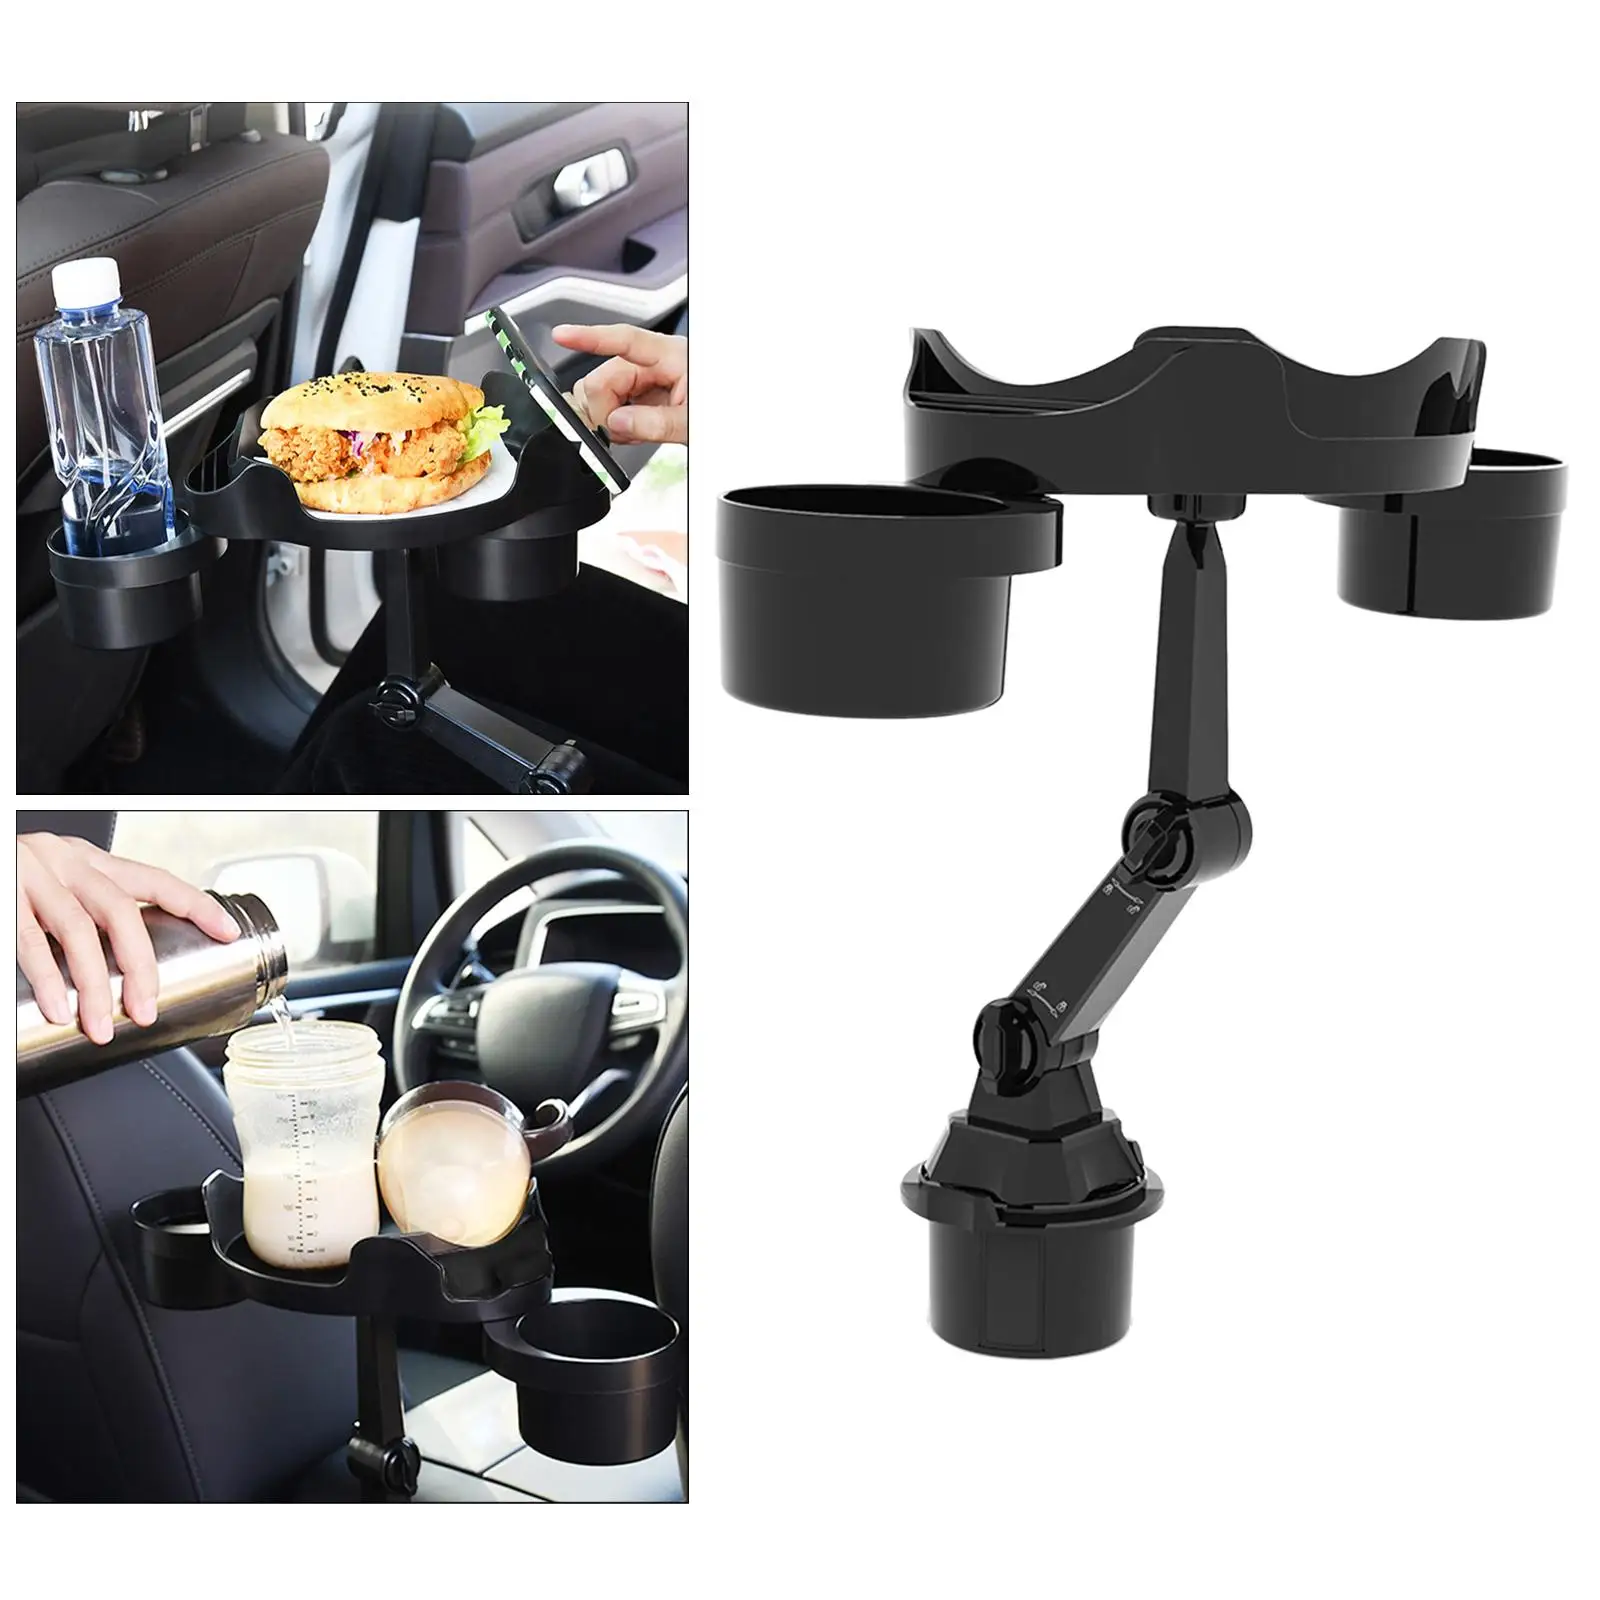 Car Cup Holder Food Tray Expander Fits for Eating Travel Most Vehicles